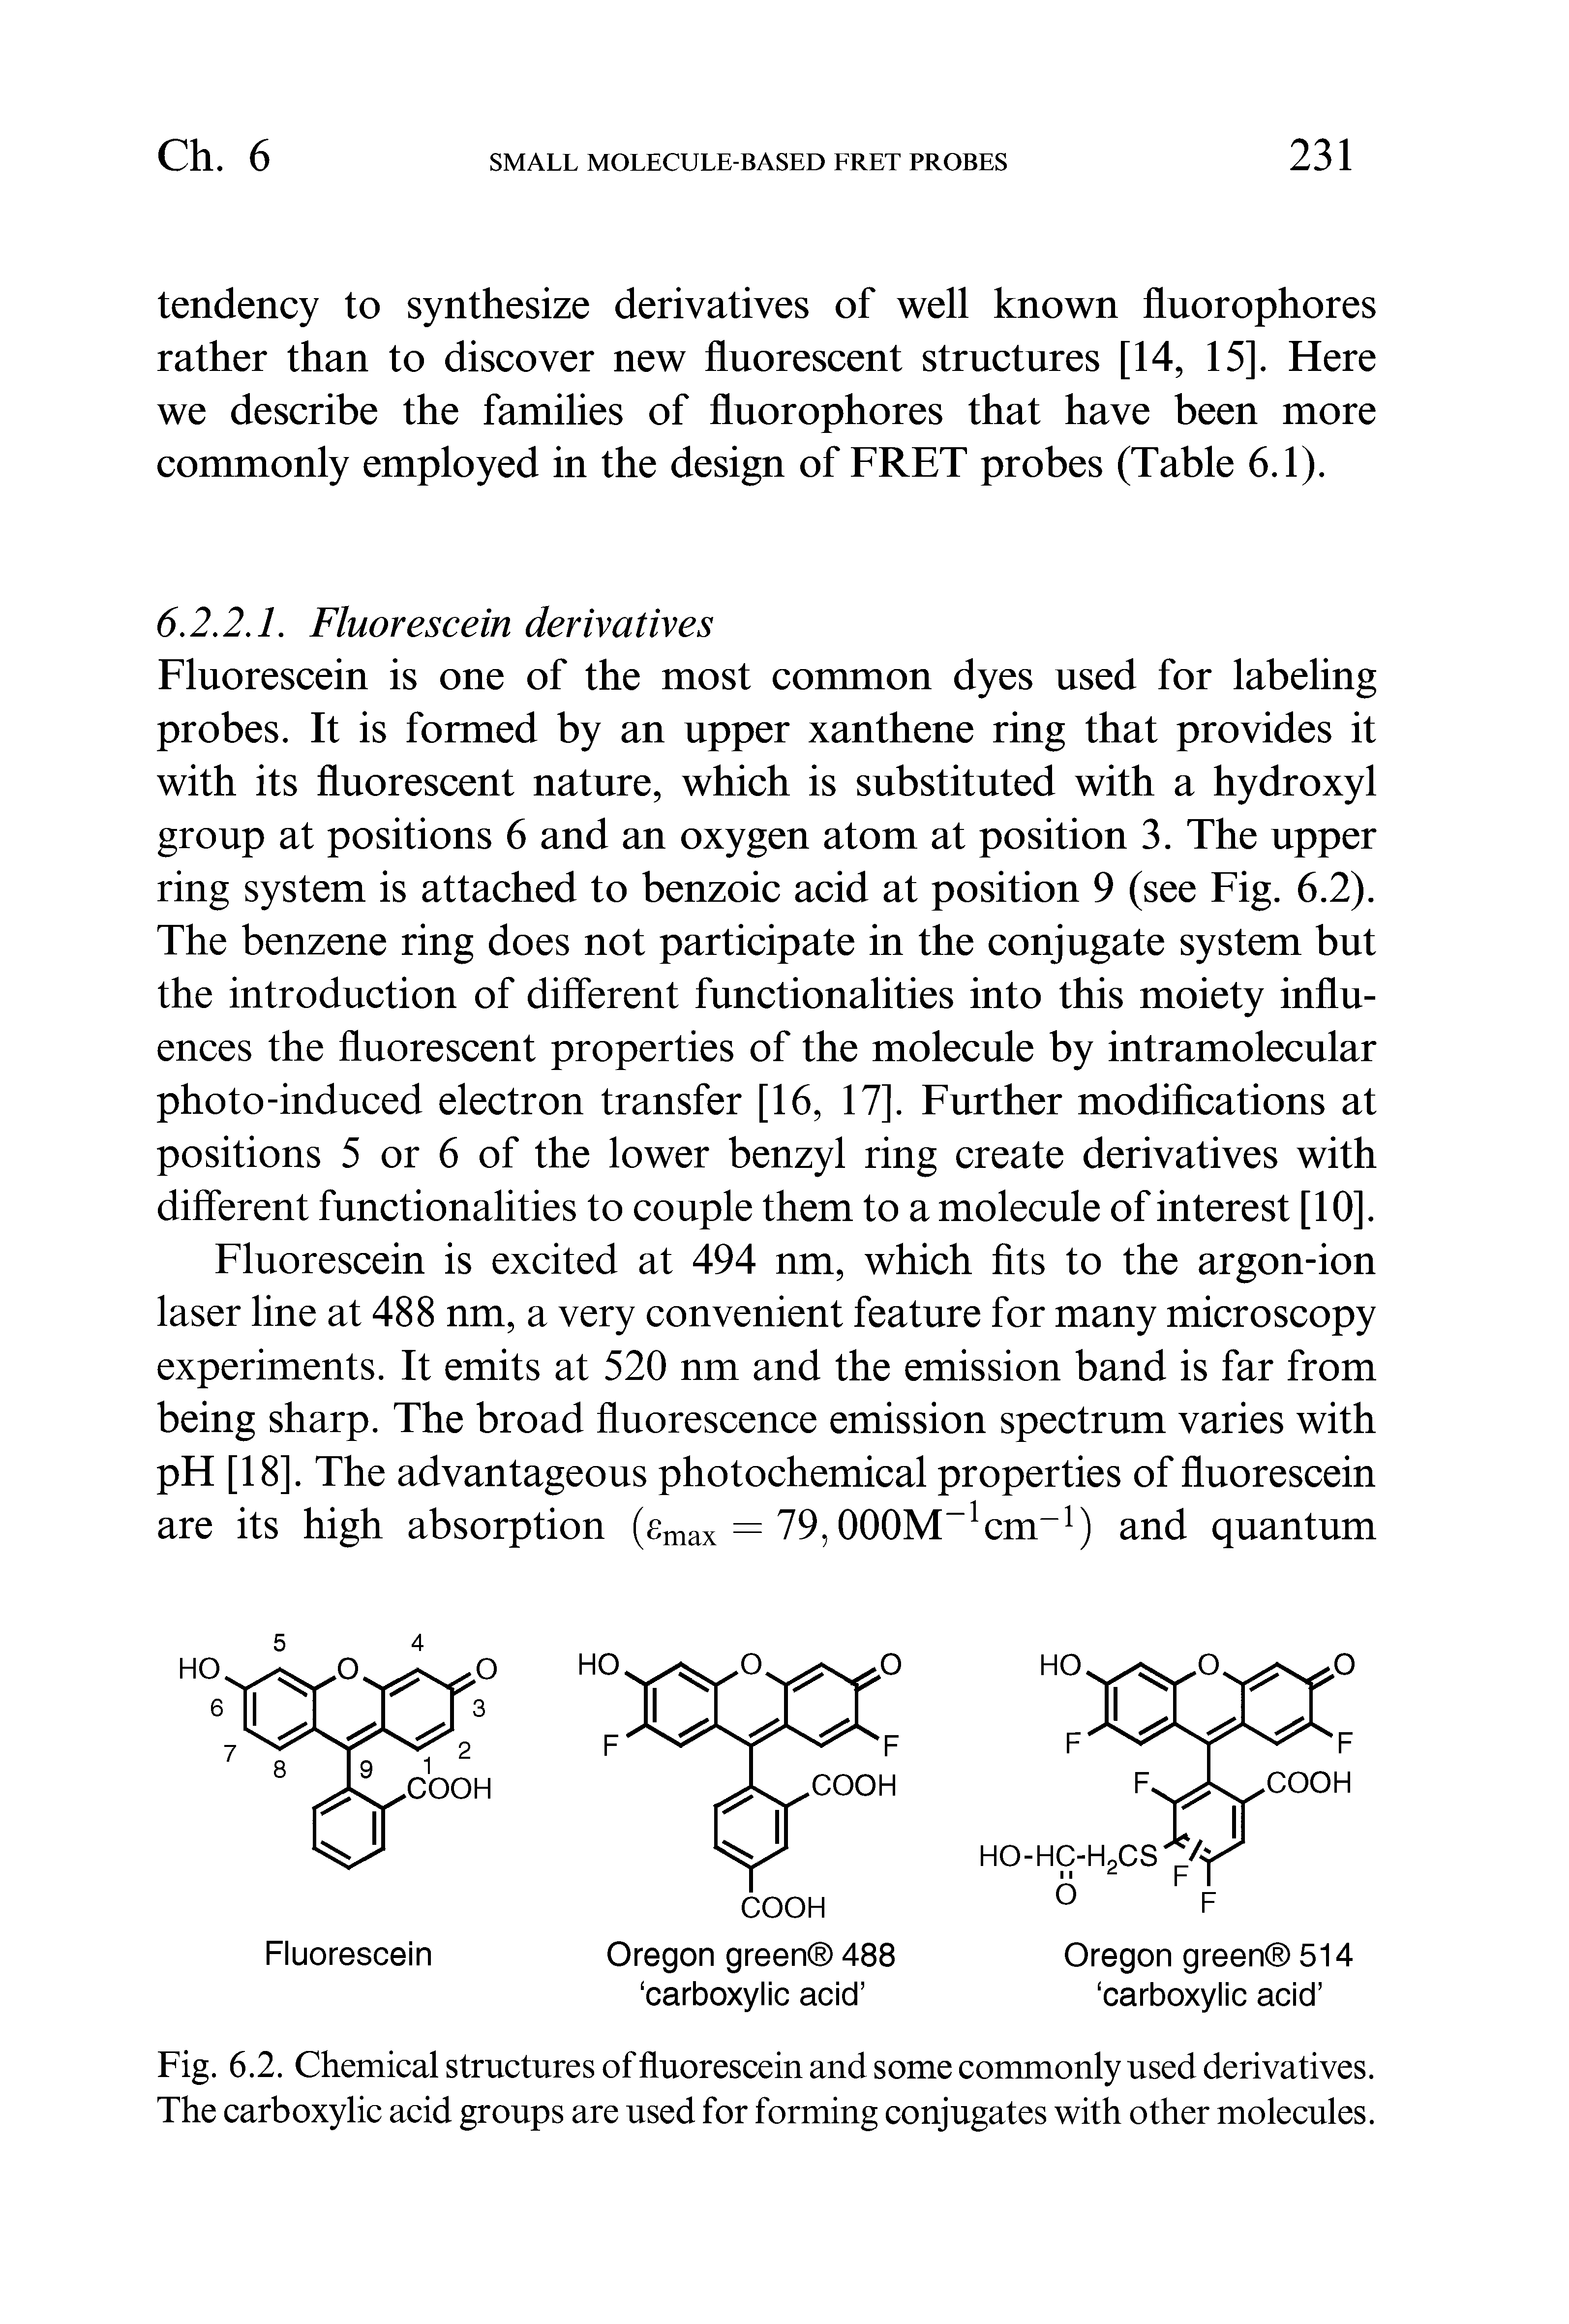 Fig. 6.2. Chemical structures of fluorescein and some commonly used derivatives. The carboxylic acid groups are used for forming conjugates with other molecules.